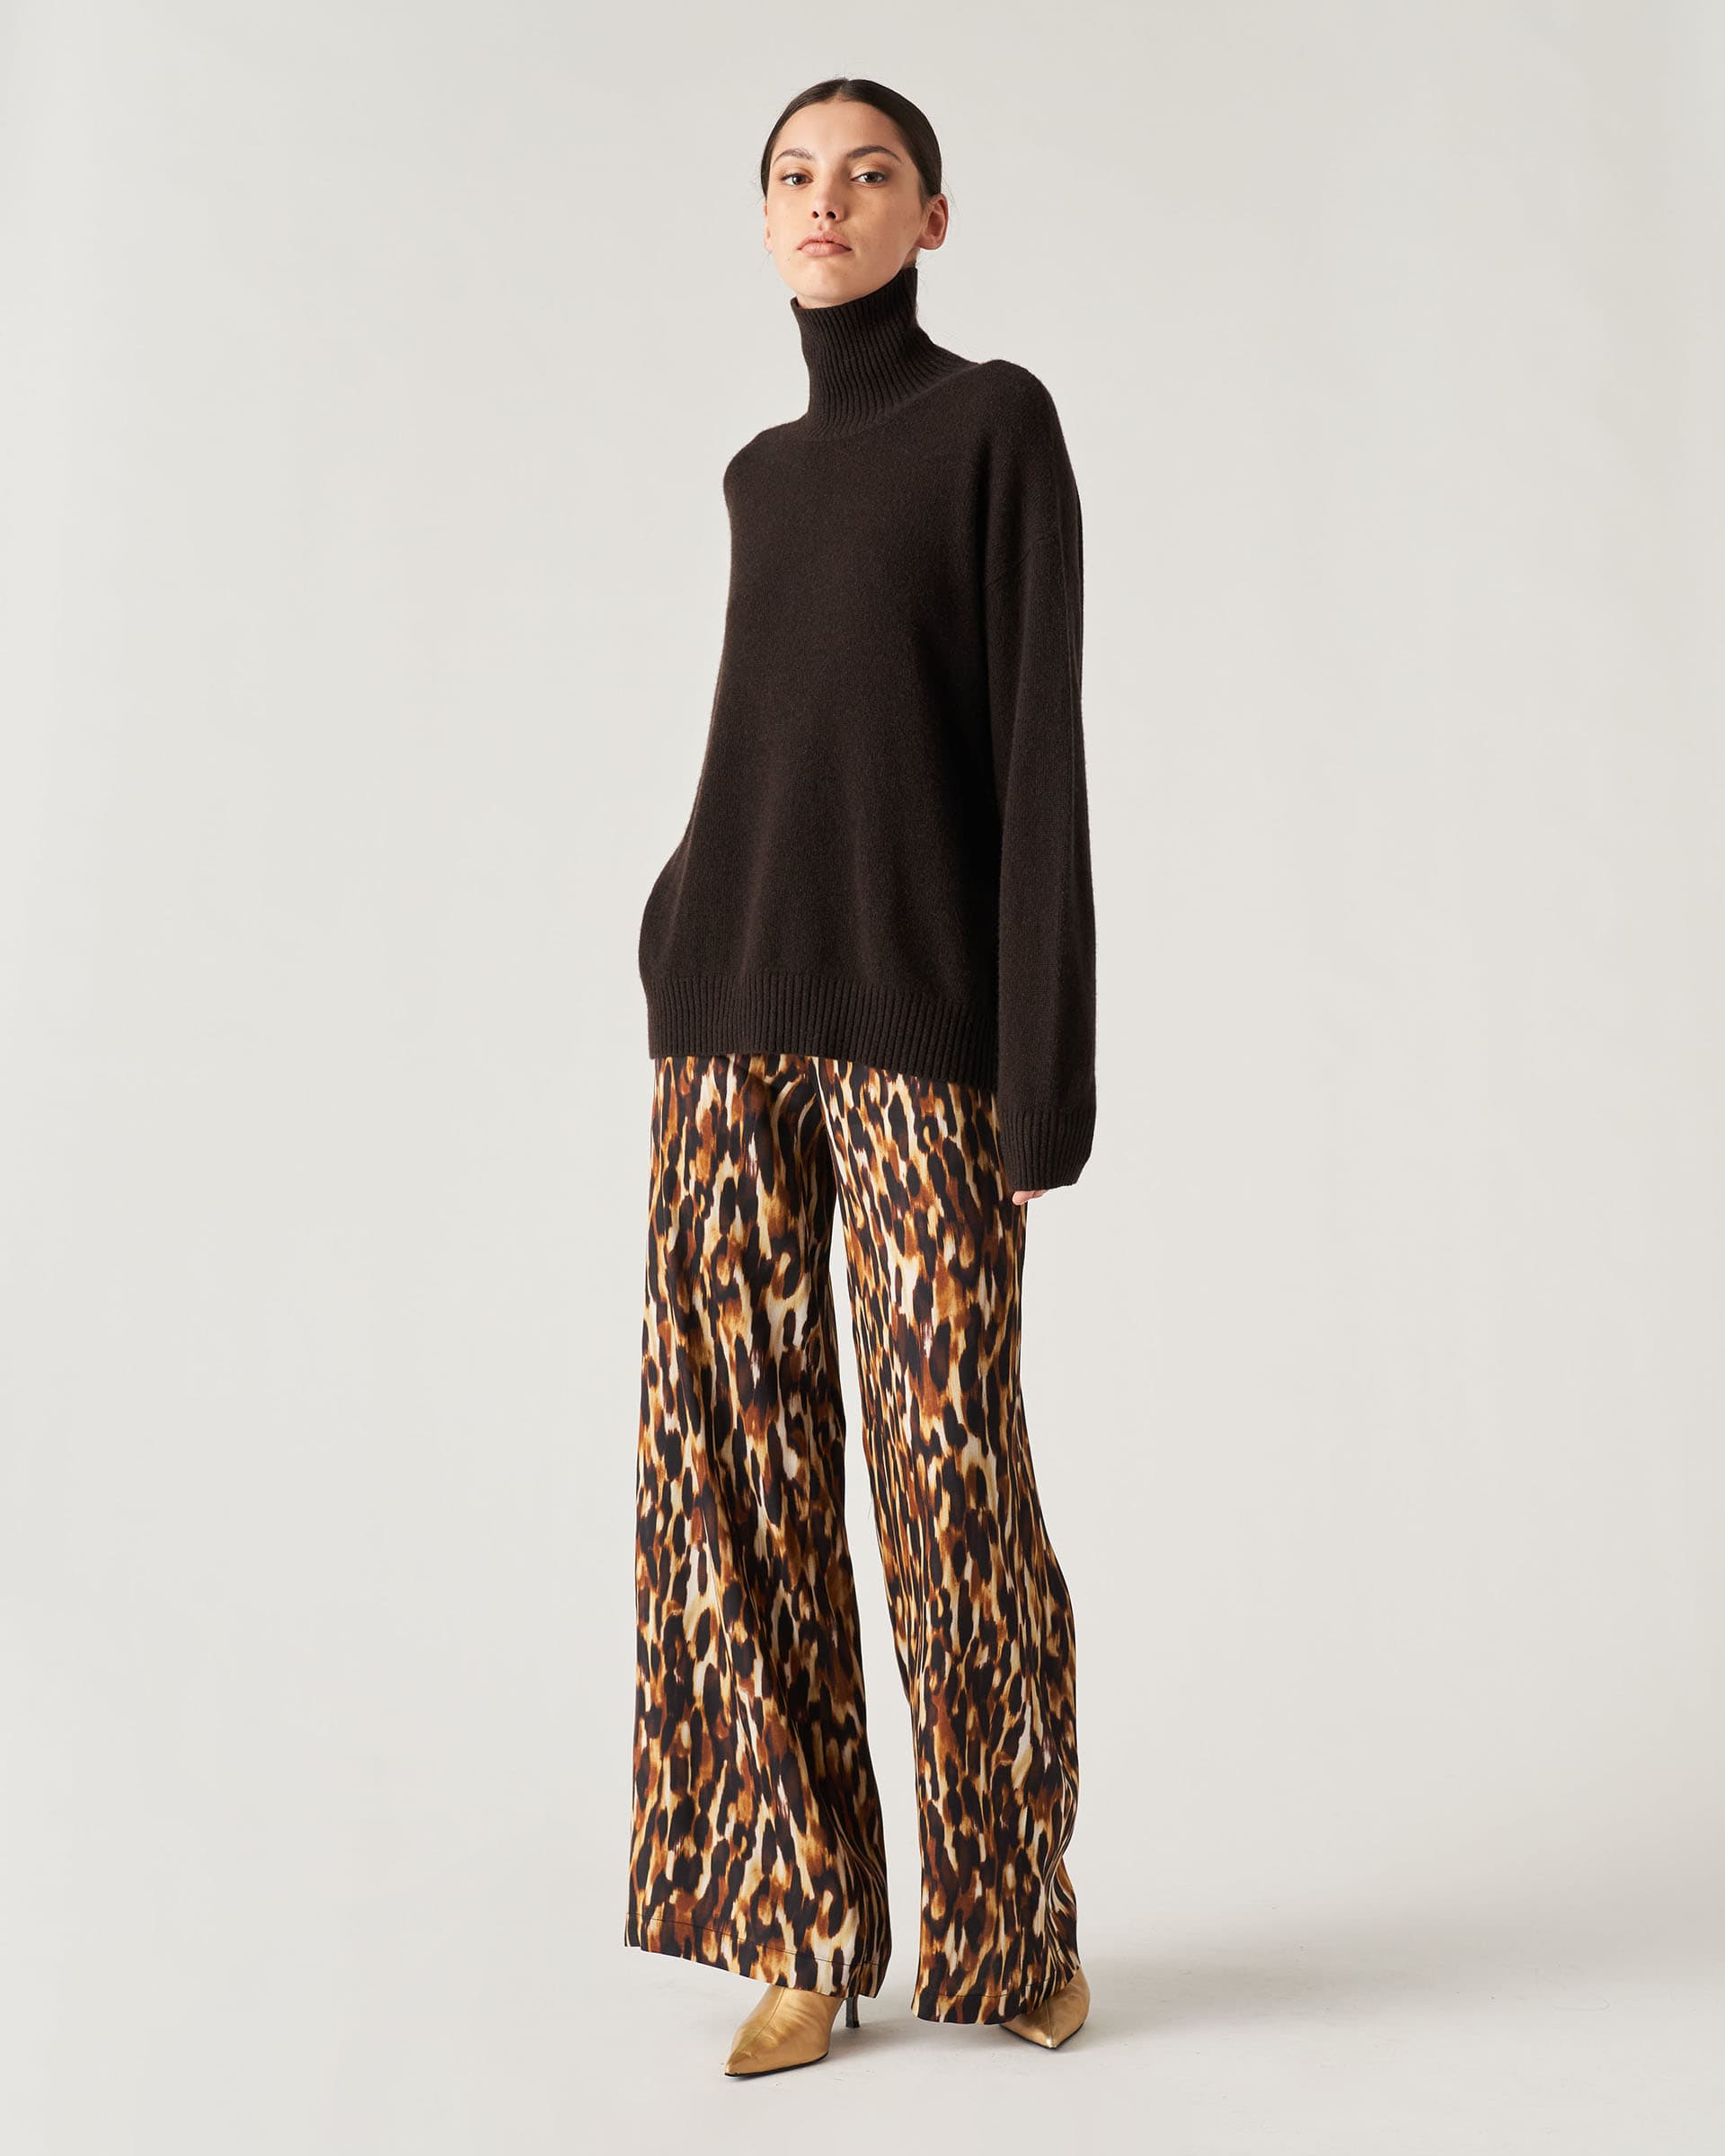 The Market Store | High Neck Sweater With Split Cuffs